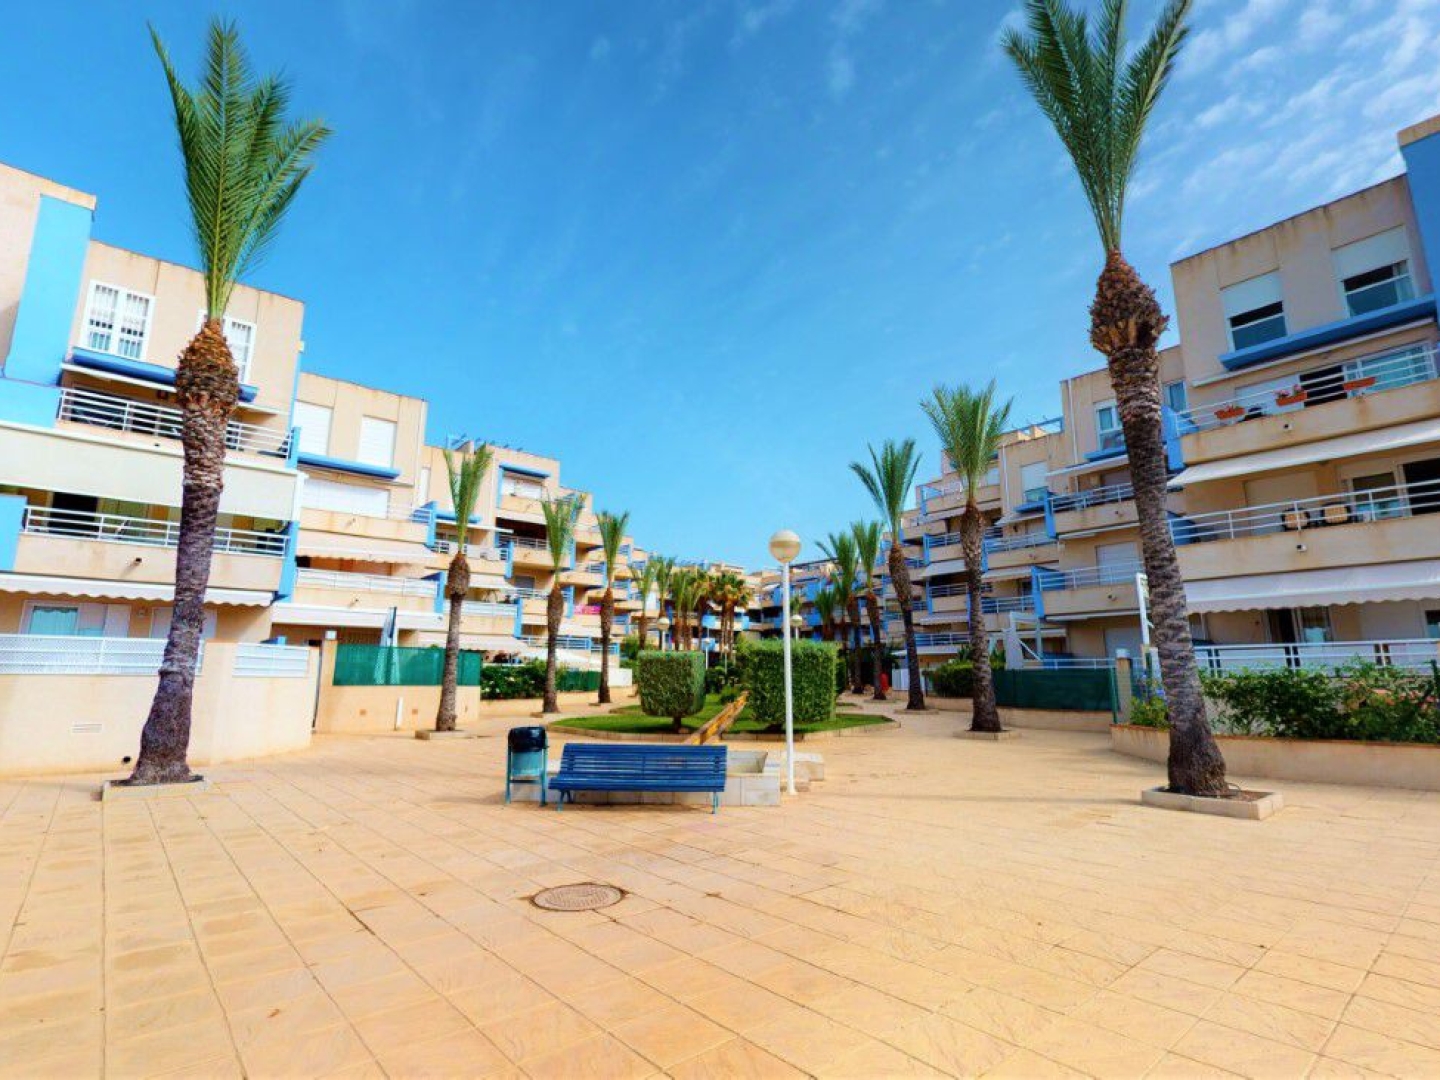 2 Bedroom 1 Bathroom Penthouse in Cabo Roig